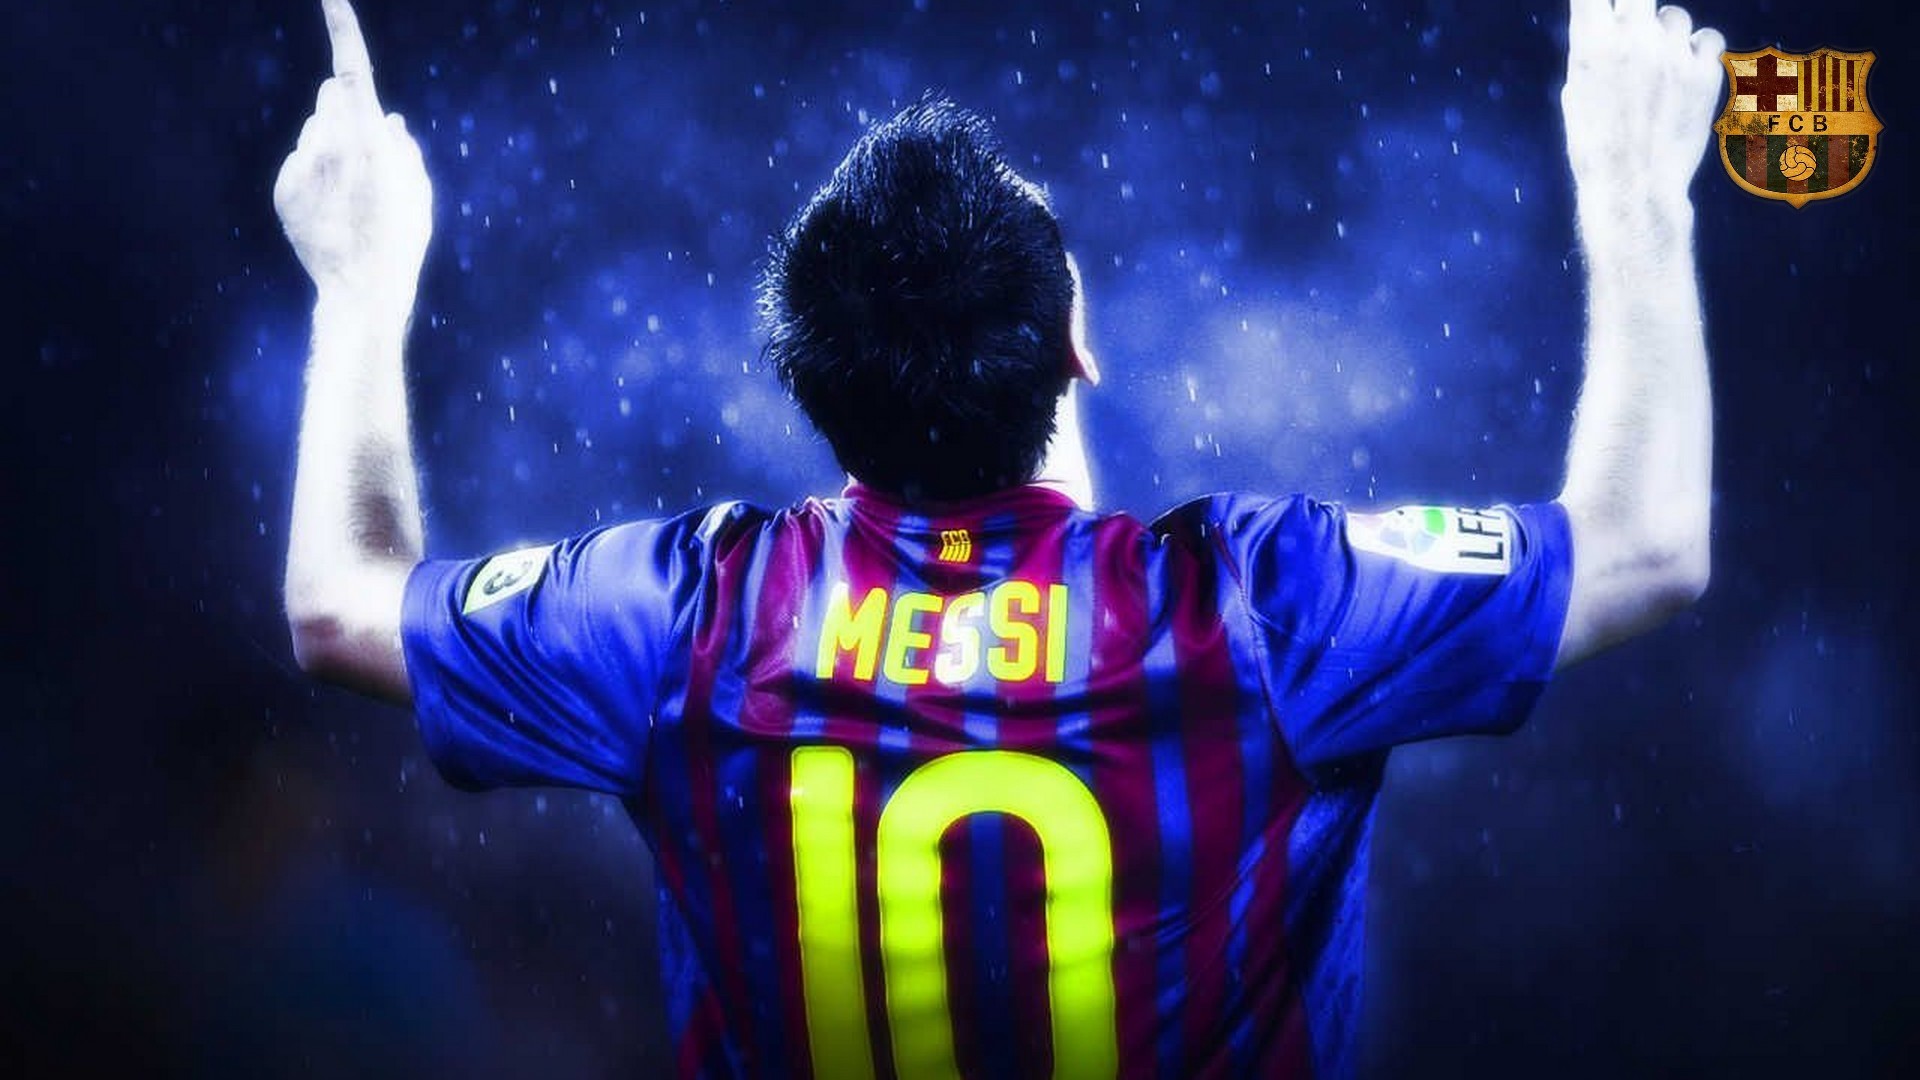 Messi Desktop Wallpaper with resolution 1920x1080 pixel. You can make this wallpaper for your Mac or Windows Desktop Background, iPhone, Android or Tablet and another Smartphone device